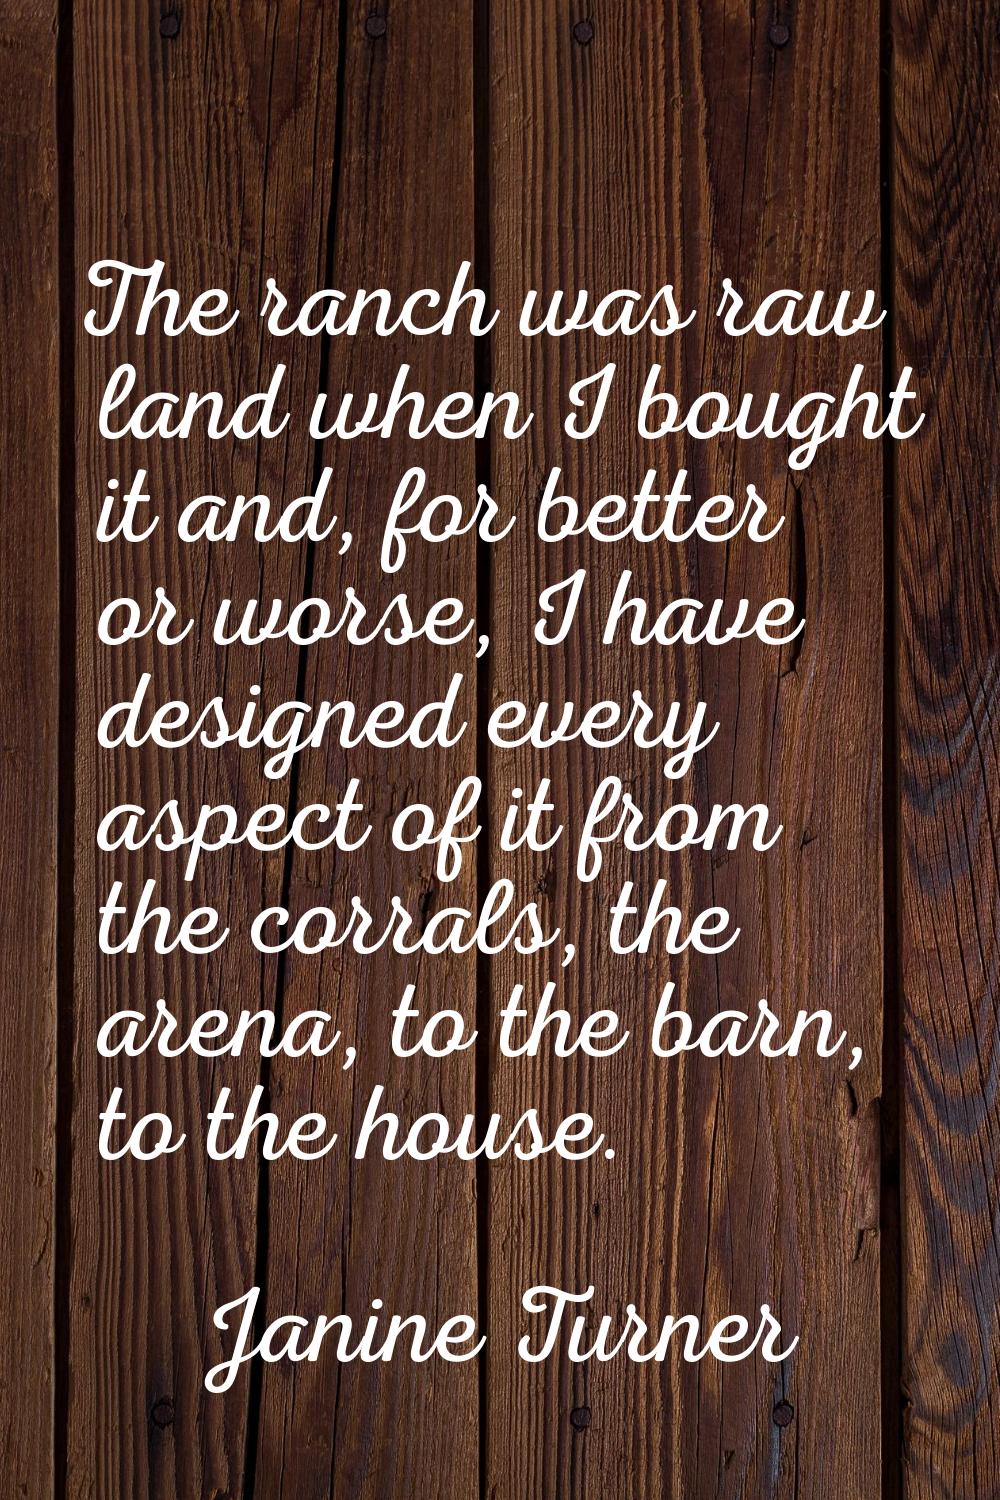 The ranch was raw land when I bought it and, for better or worse, I have designed every aspect of i